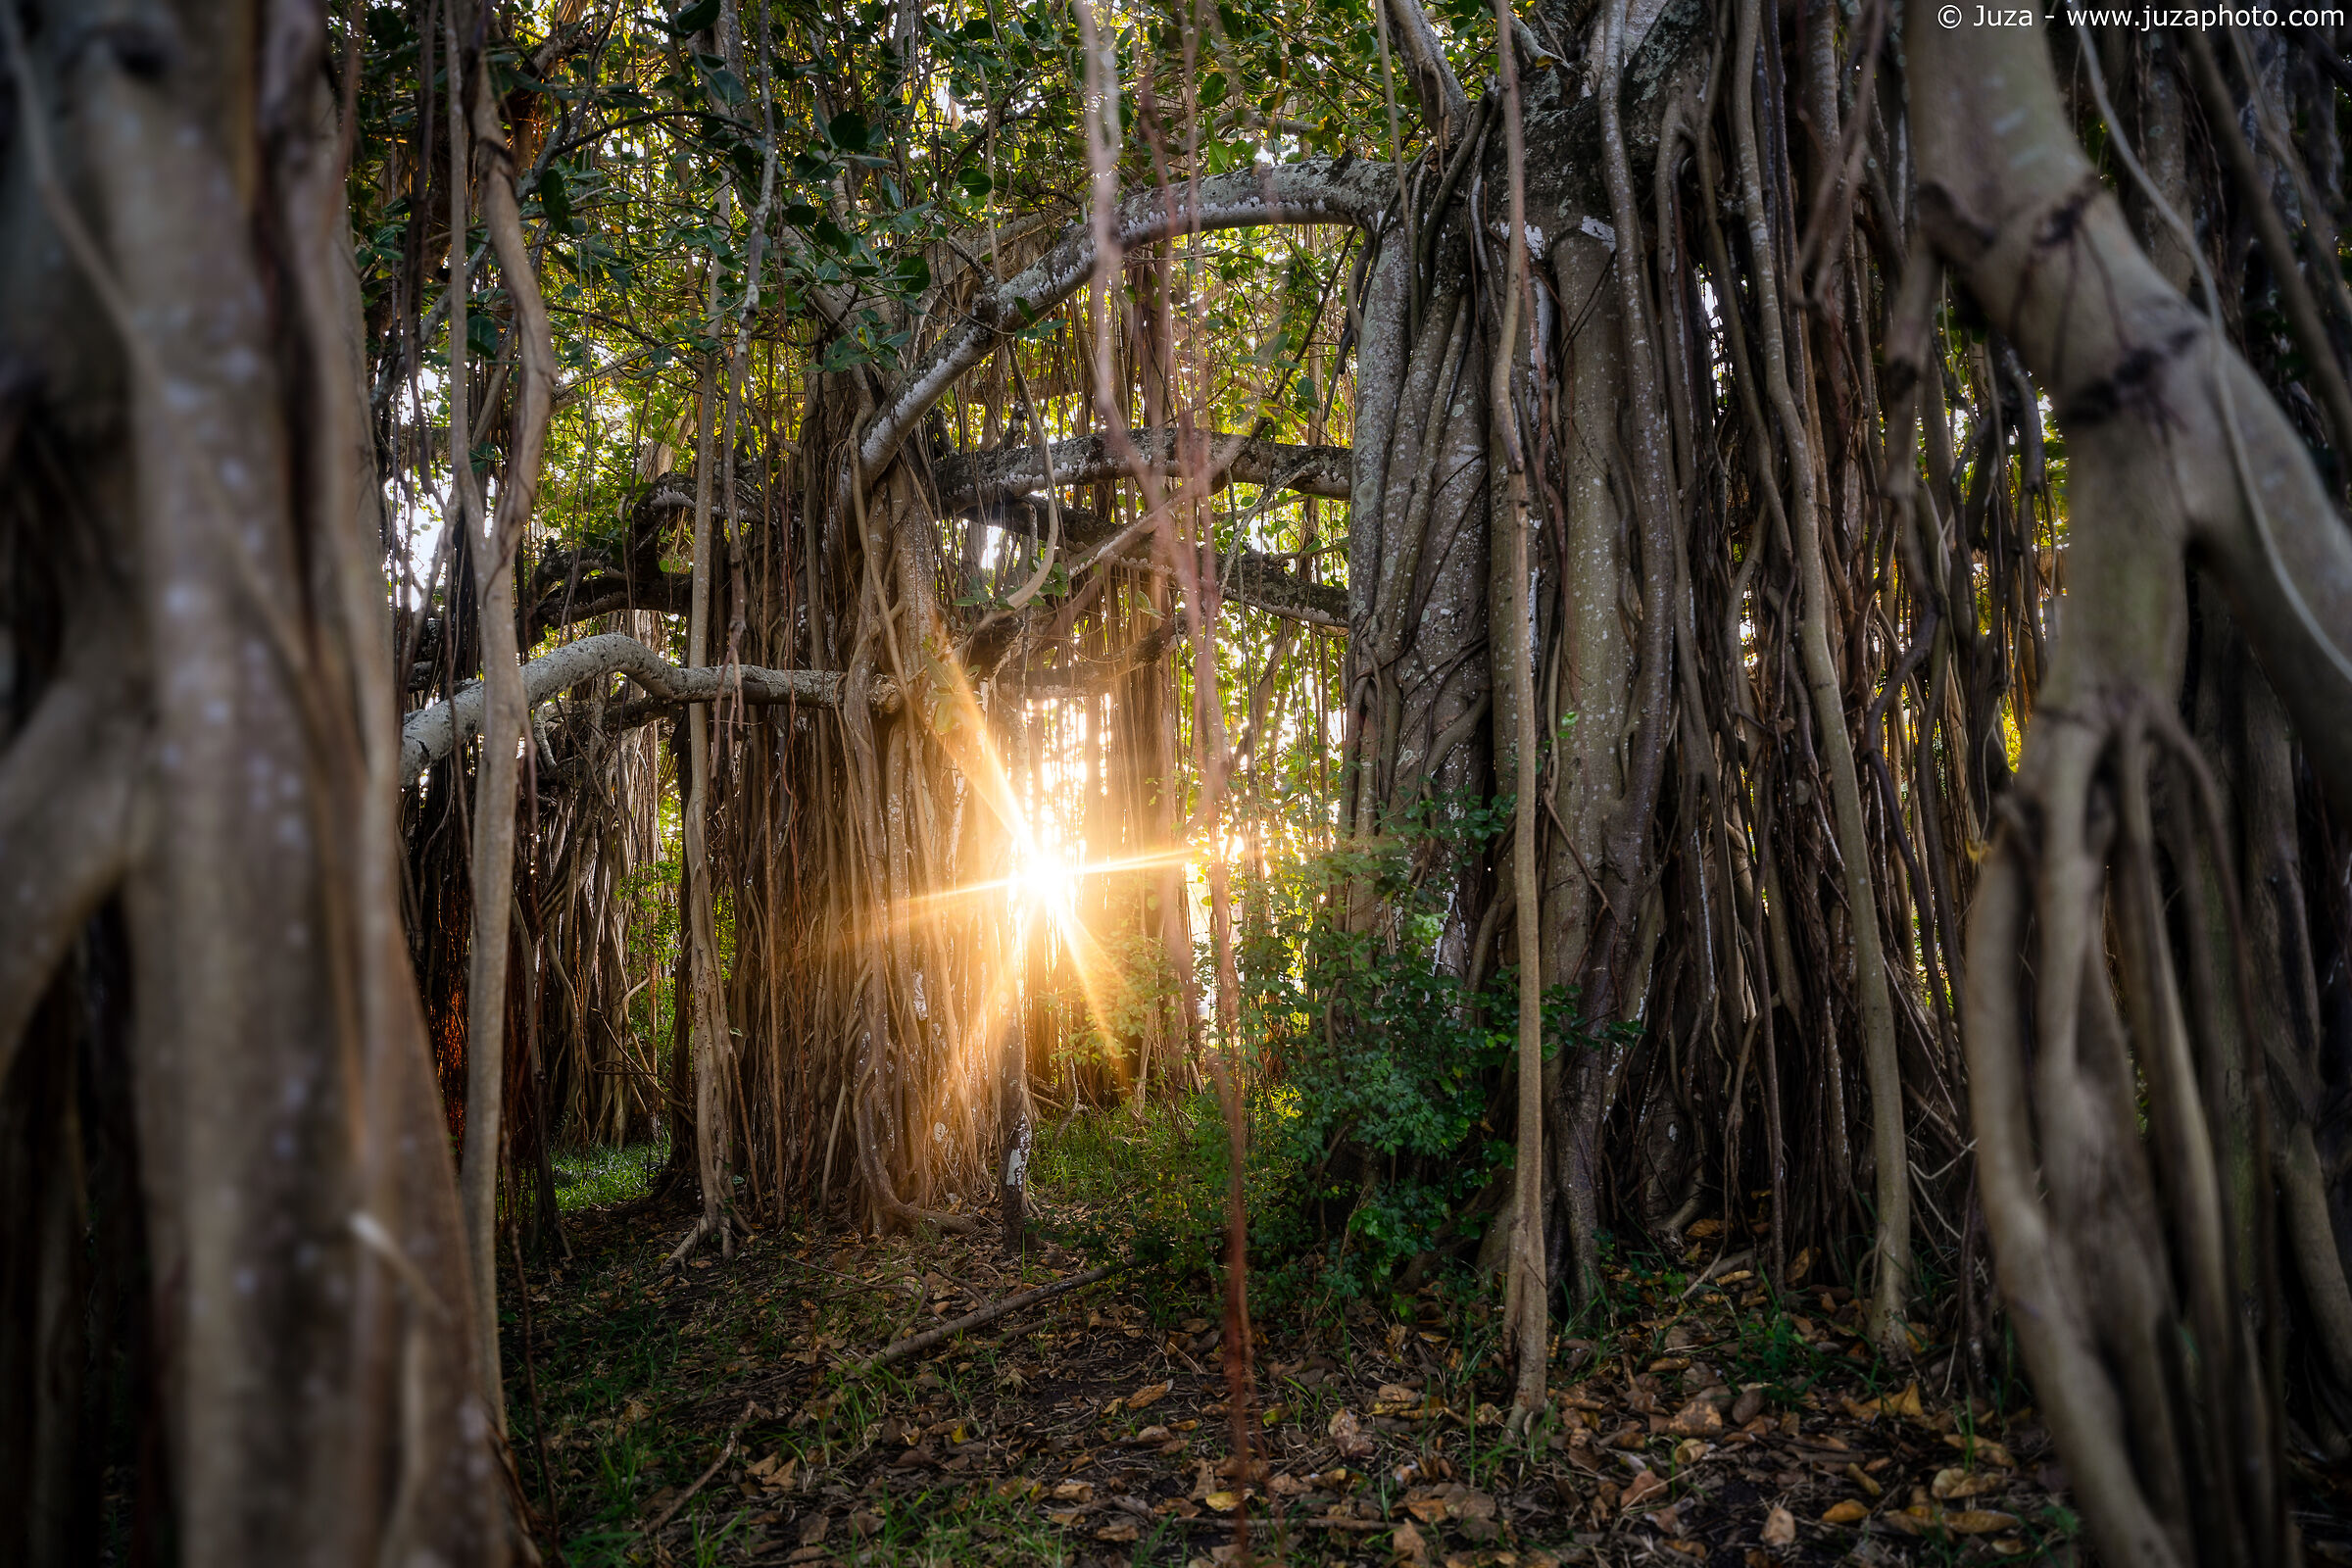 In the banyan forest...